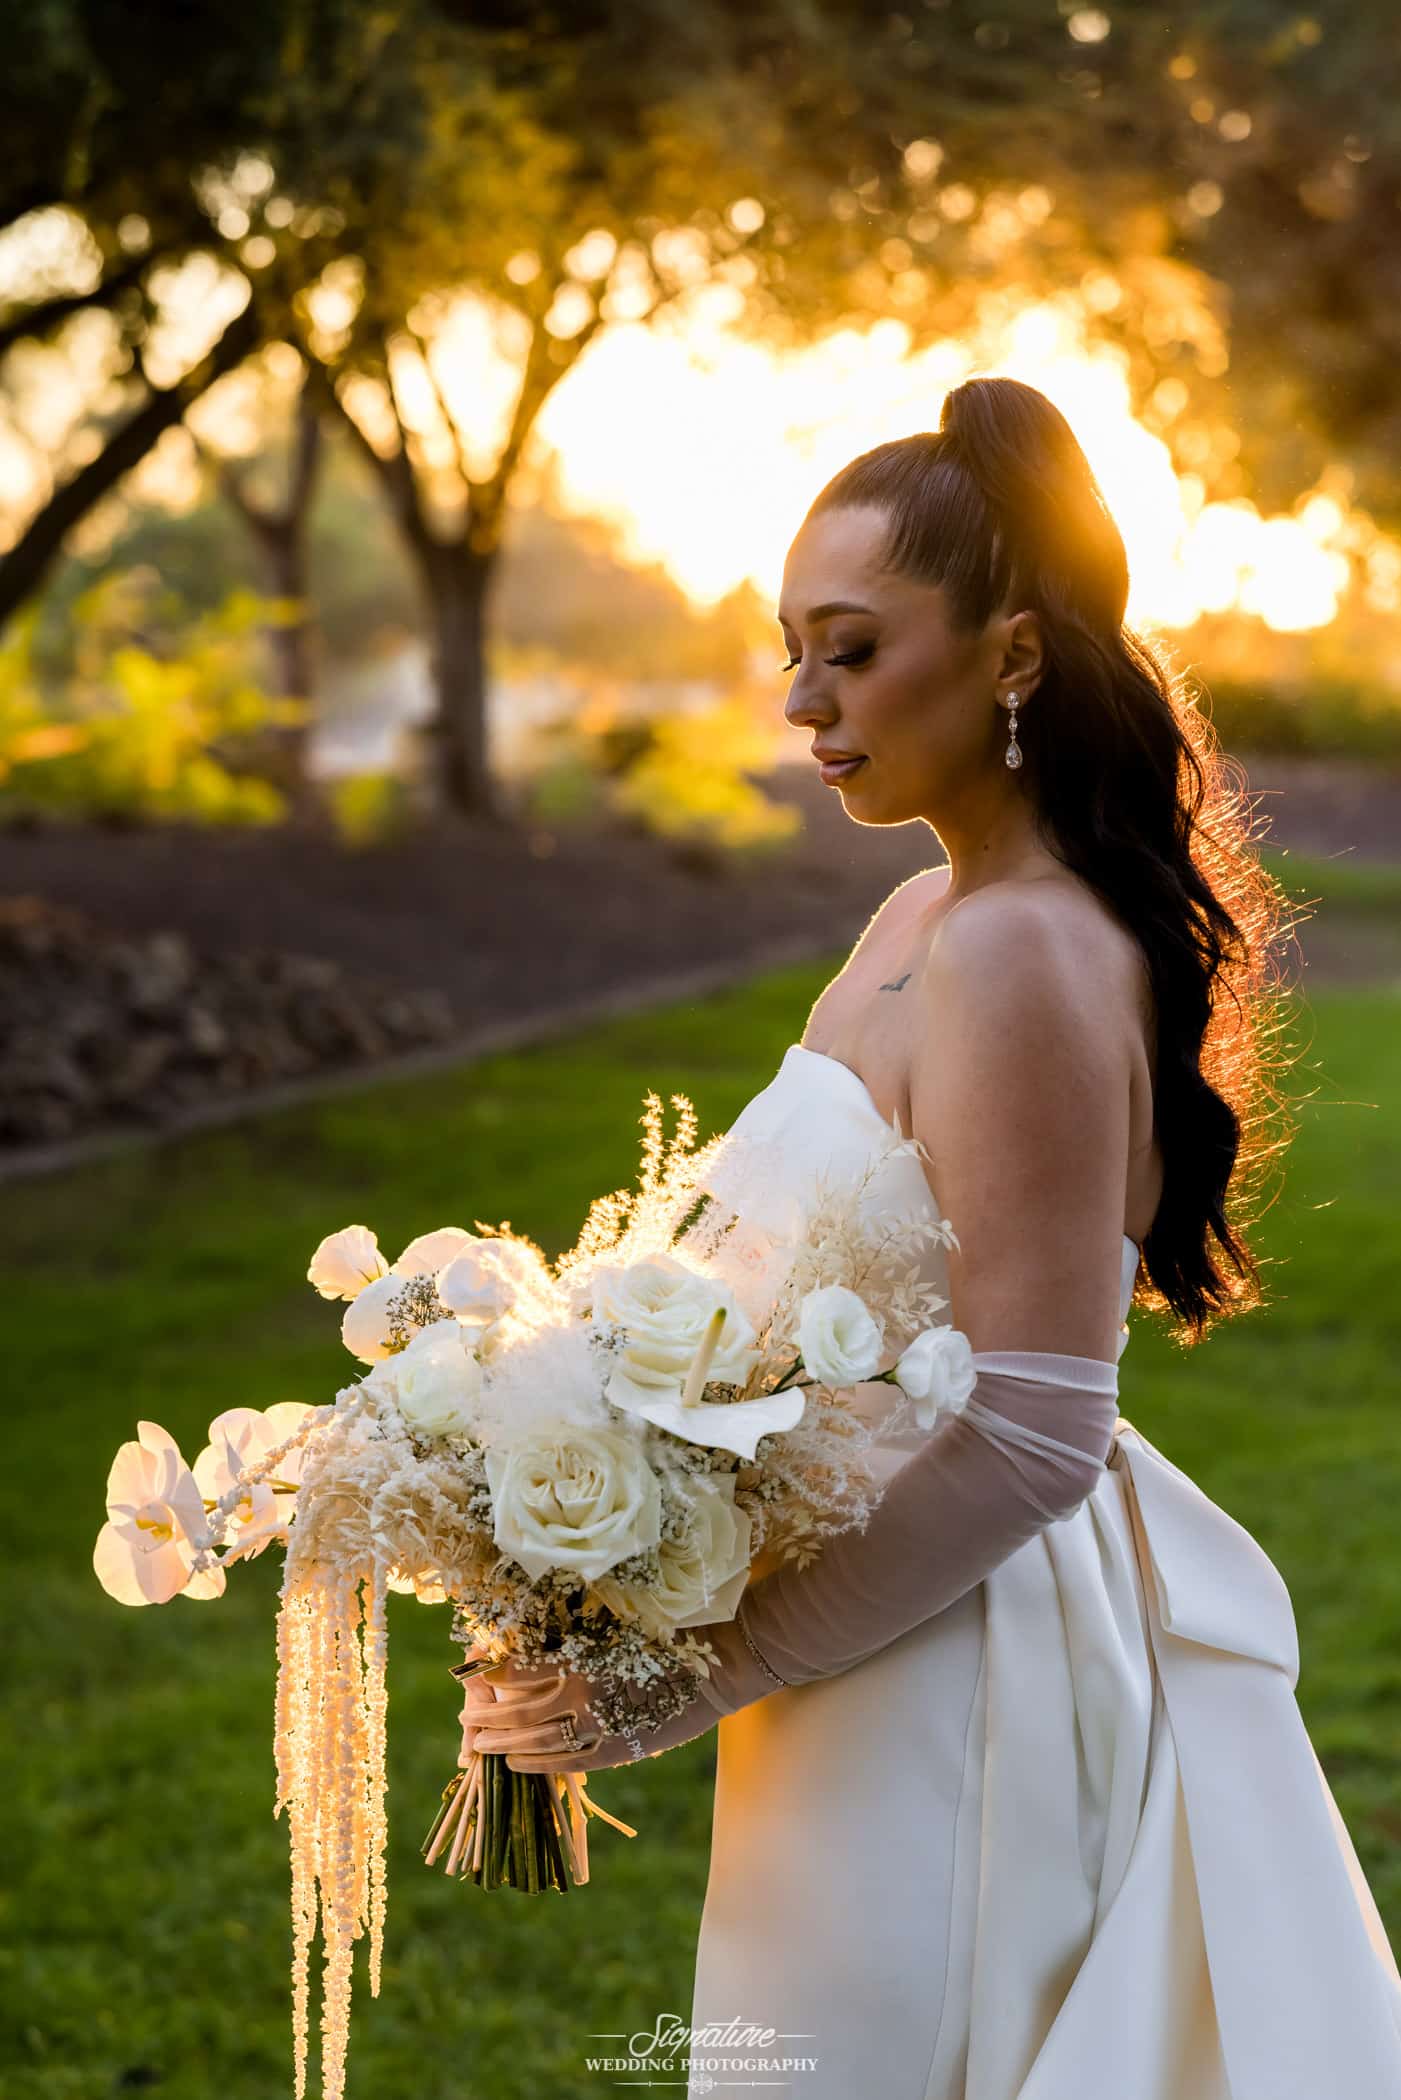 Bride holding bouquet at sunset